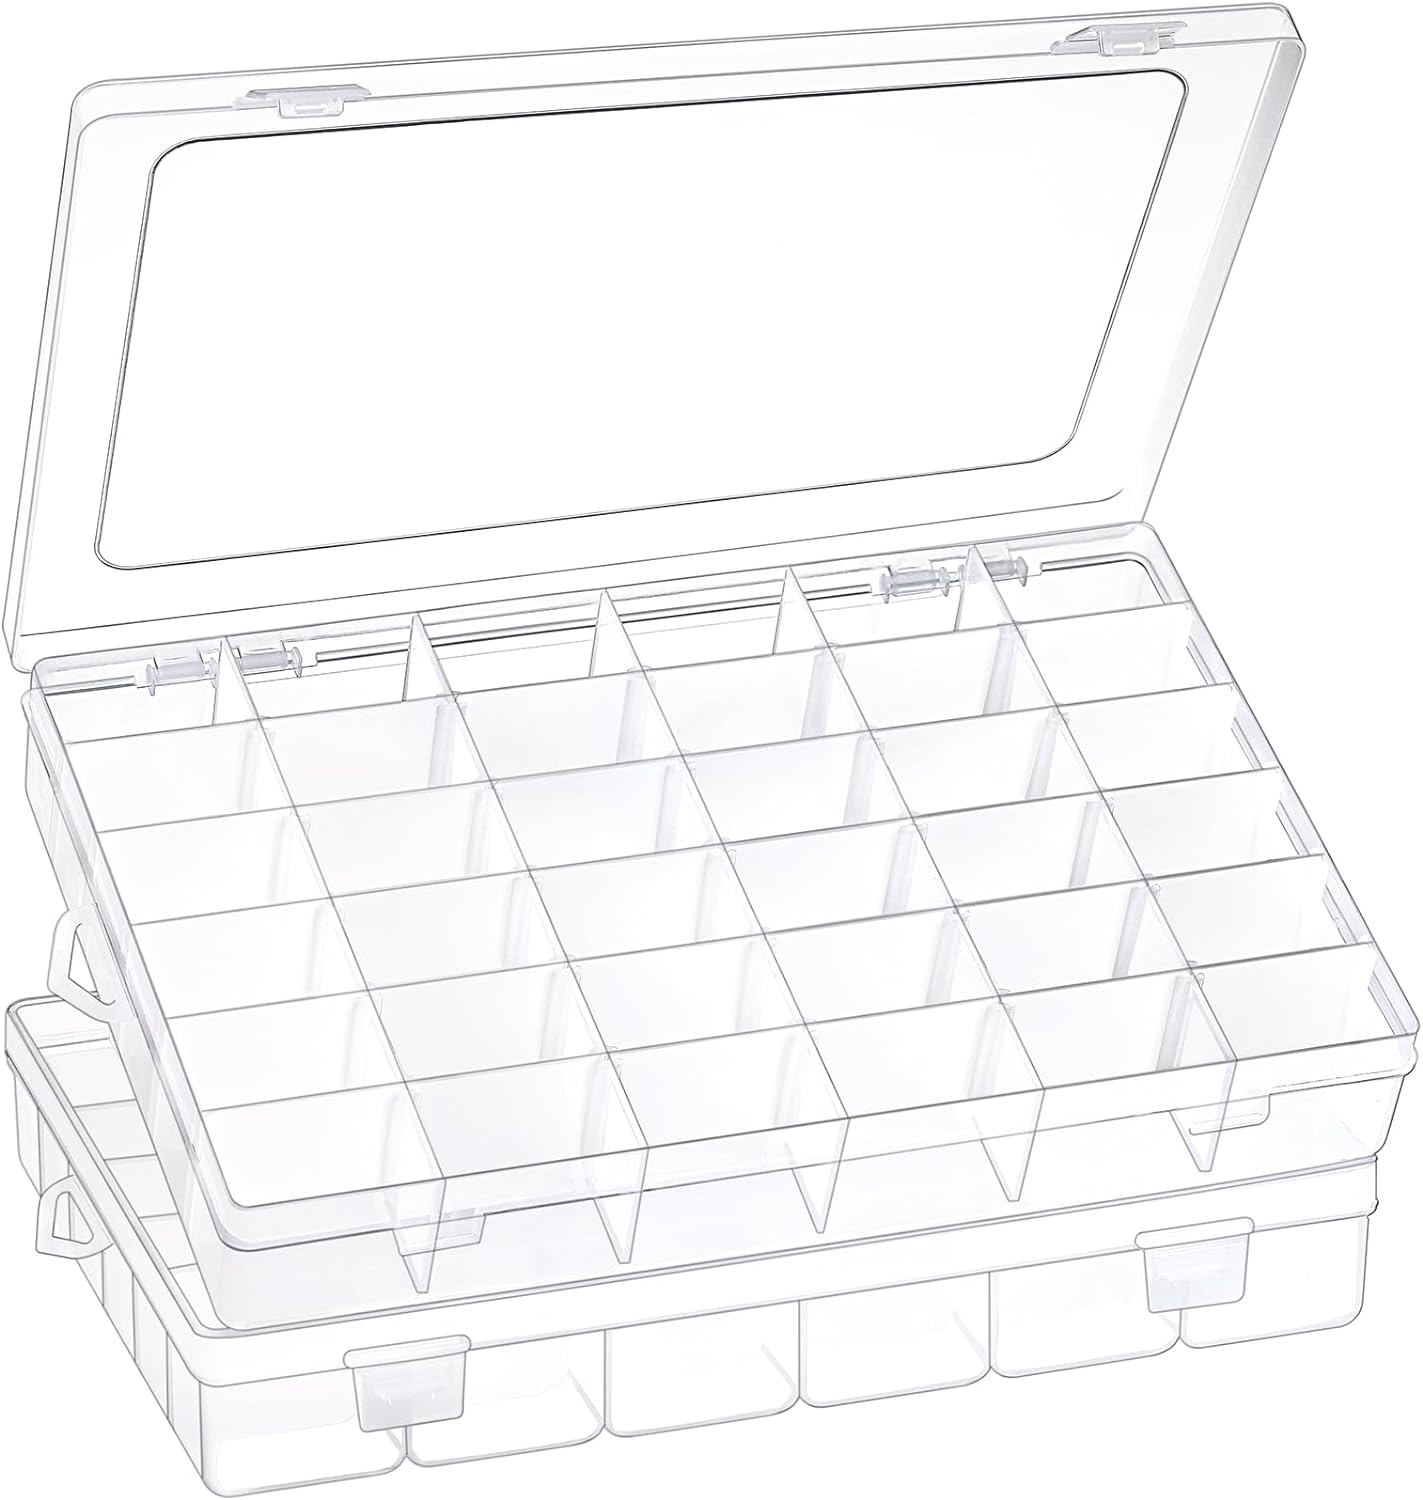 Clear Plastic Organizer Box with Adjustable Dividers, 2 Pack Small Craft Organizers with 36 Grids